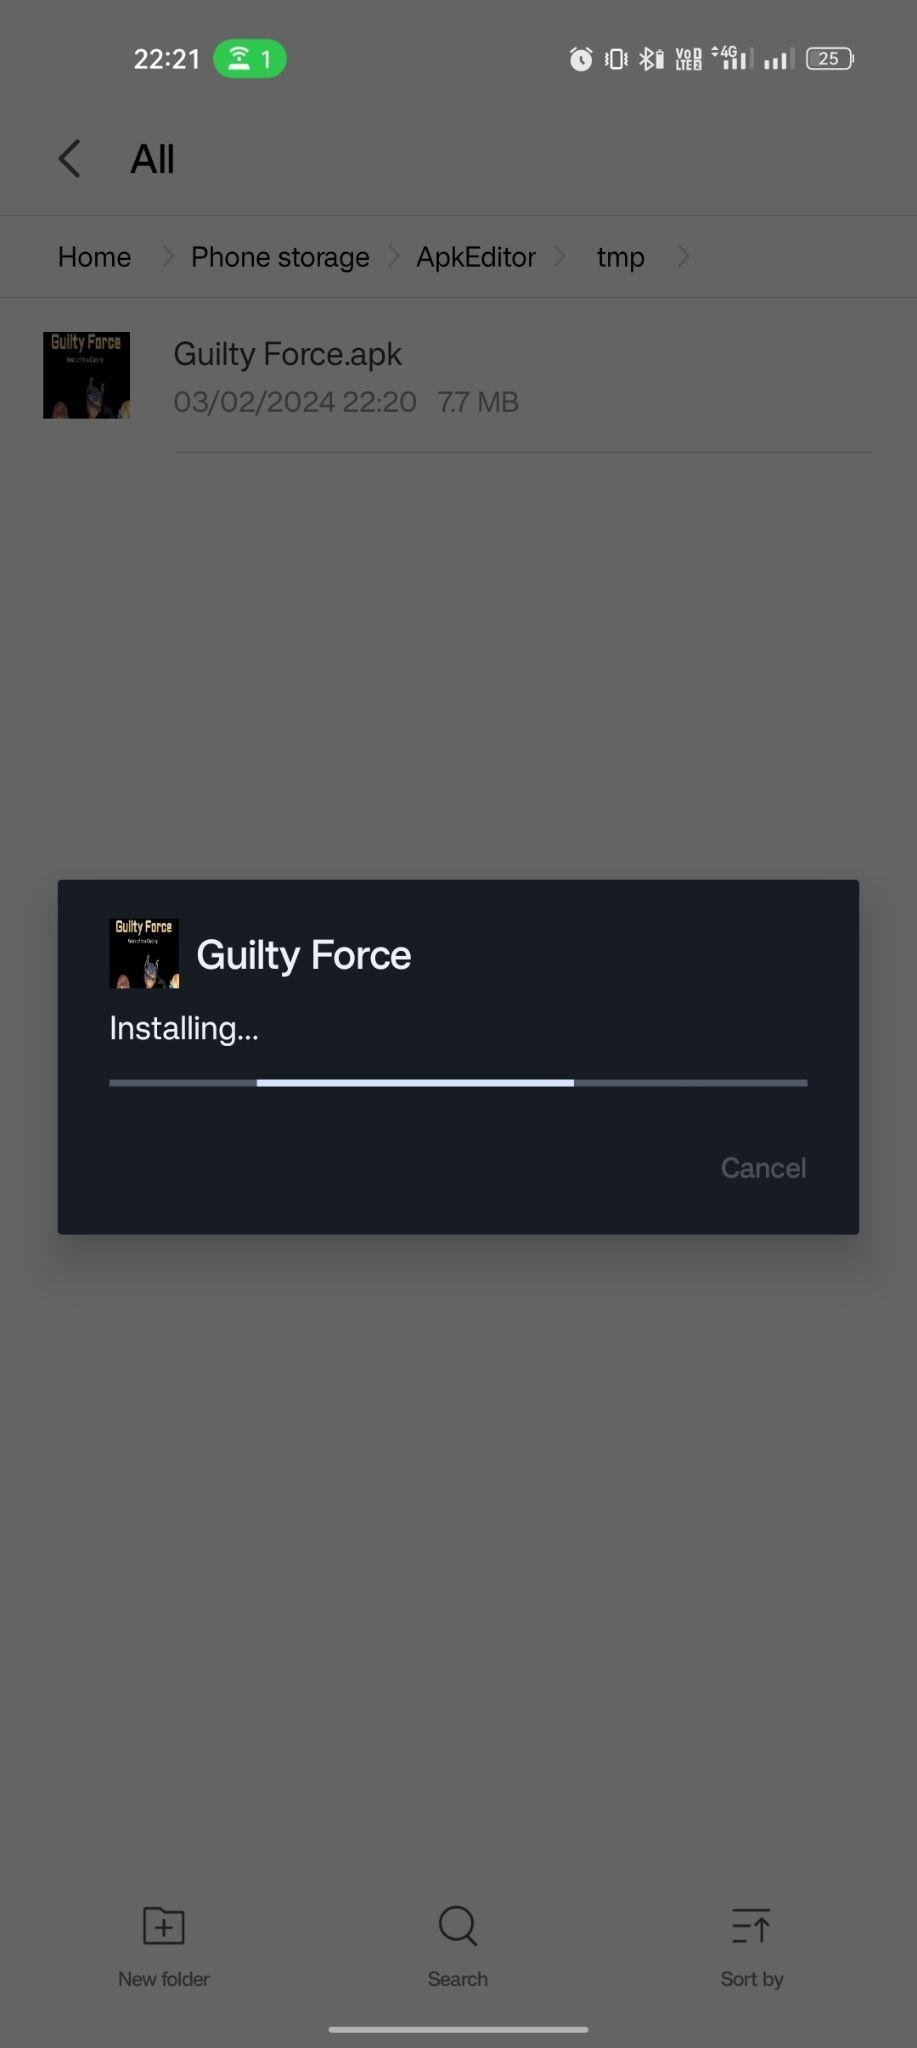 Guilty Force apk installing